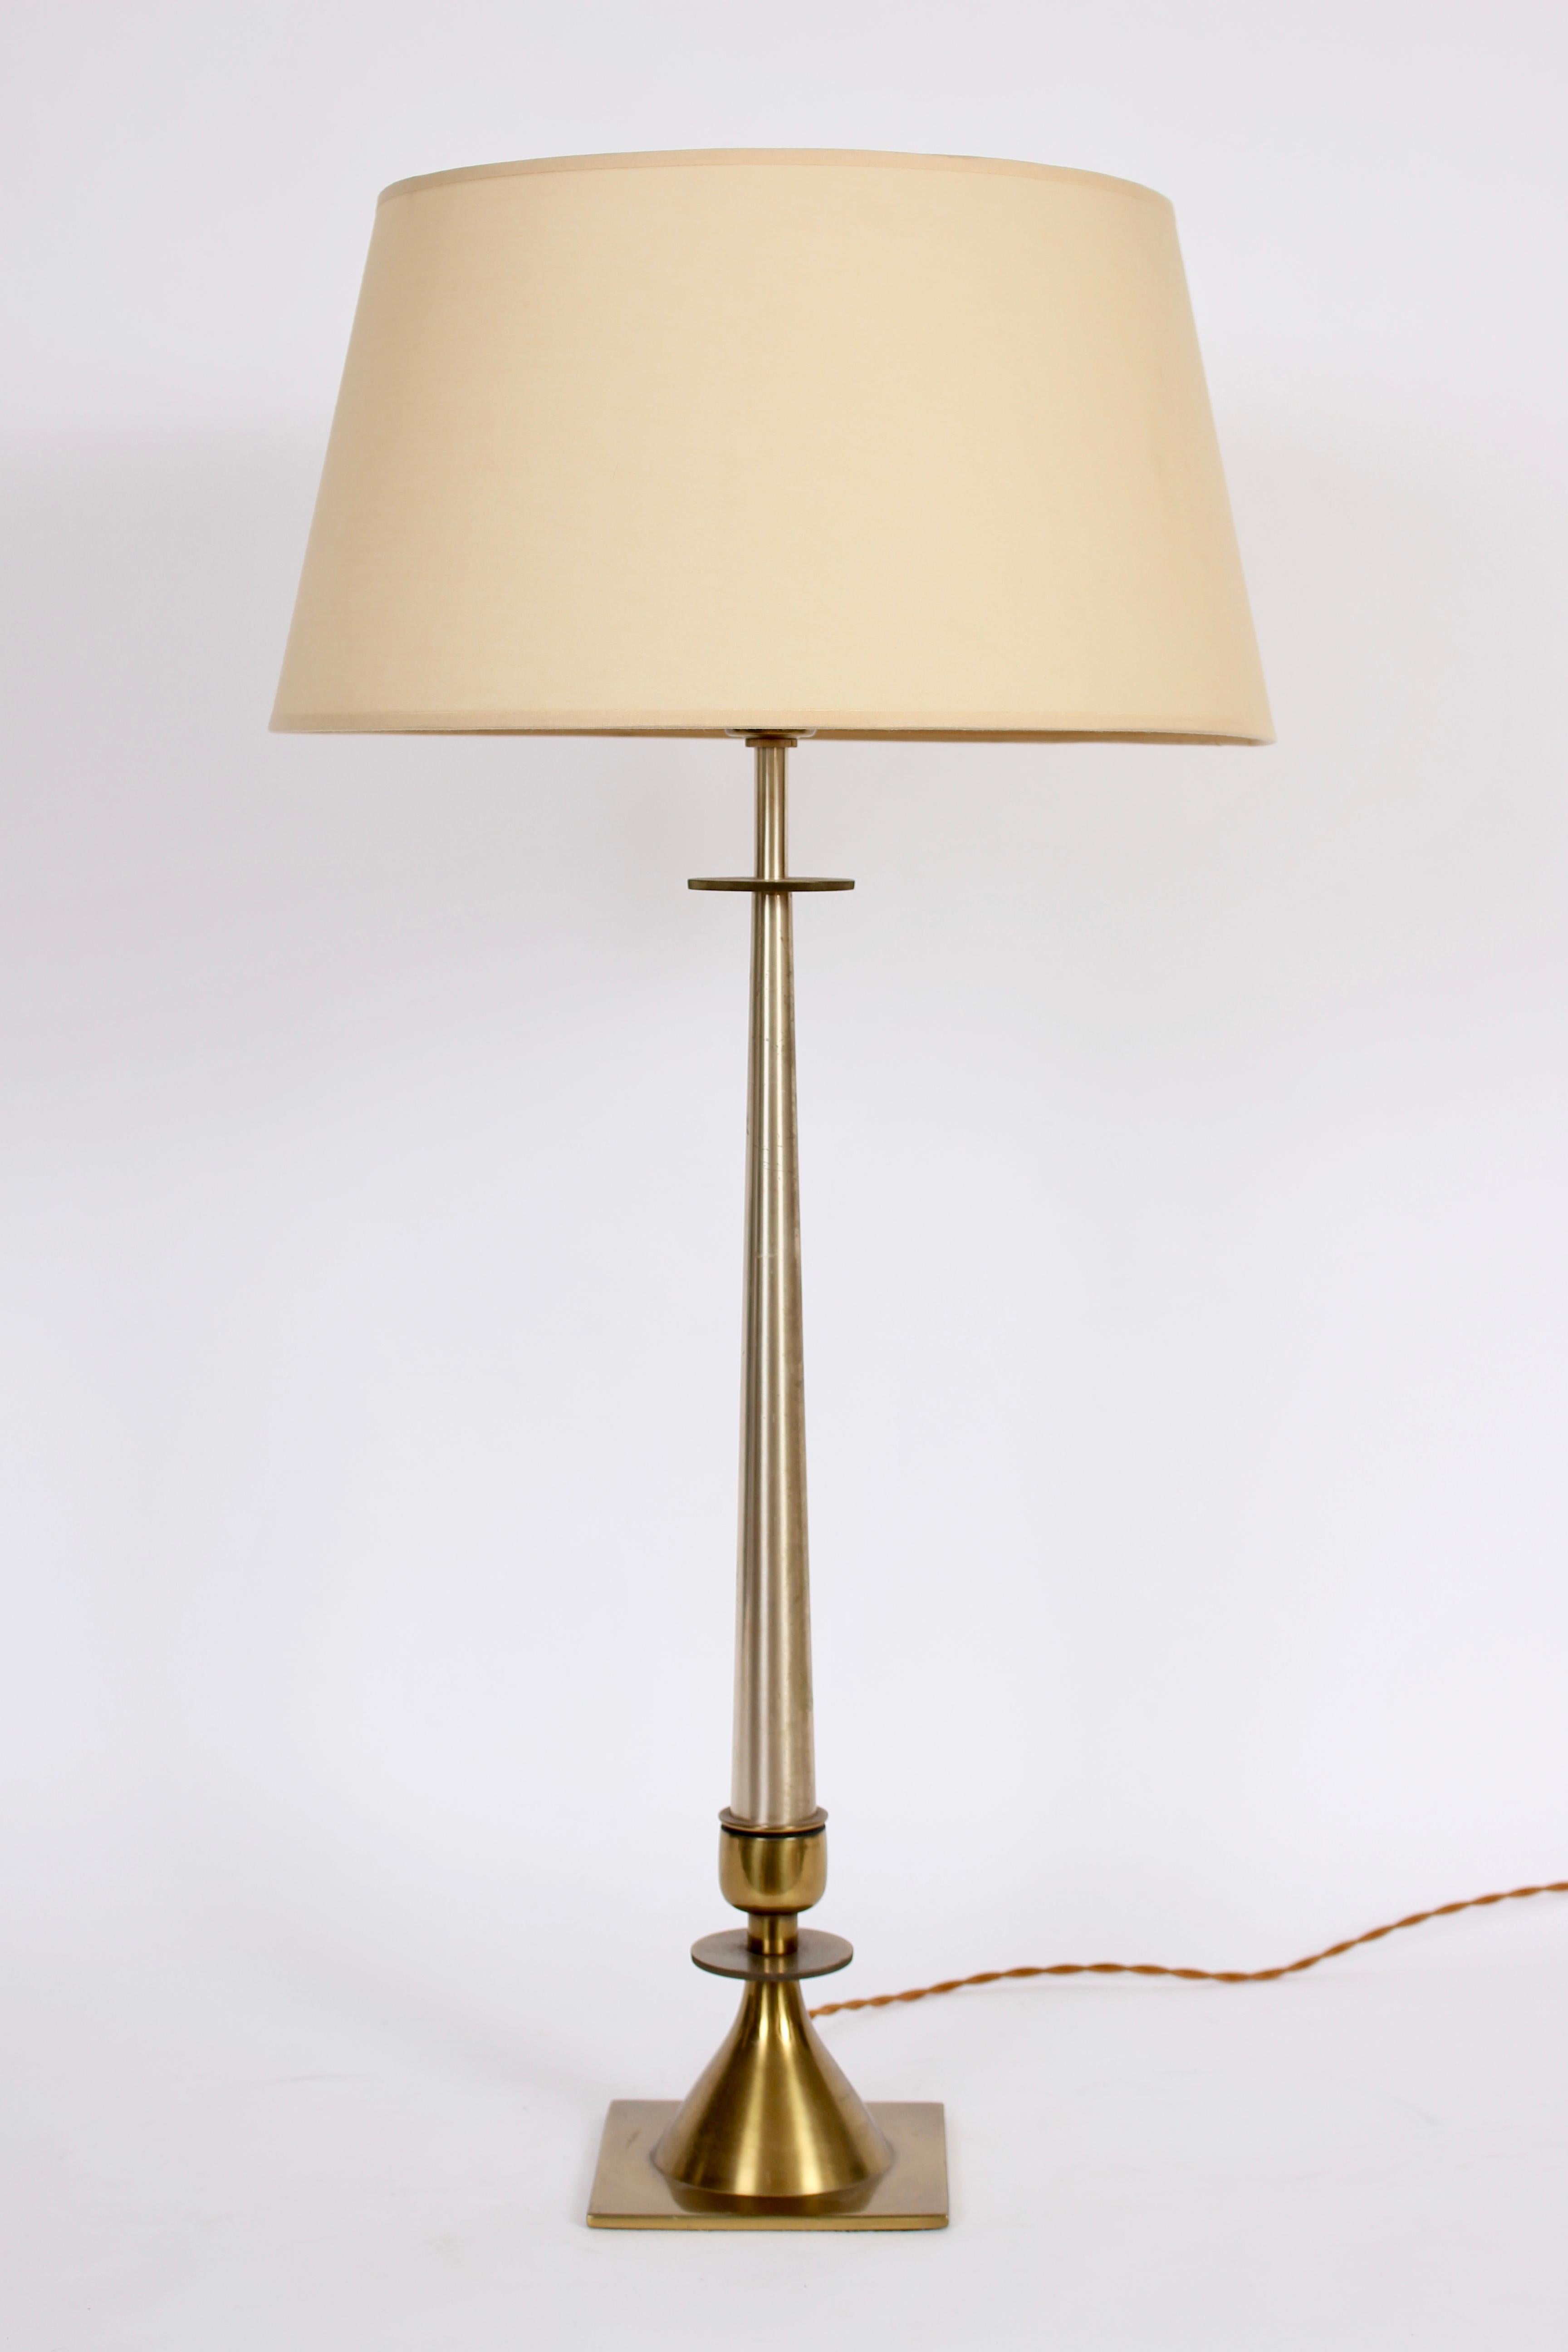 Substantial Hollywood Regency Stiffel brushed Brass & Nickel Plate Table Lamp. Circa 1960. Small footprint.  Featuring a tall slender reflective form approximately 3 feet tall, relaying a Gold and Silver affect. Includes White milk glass liner